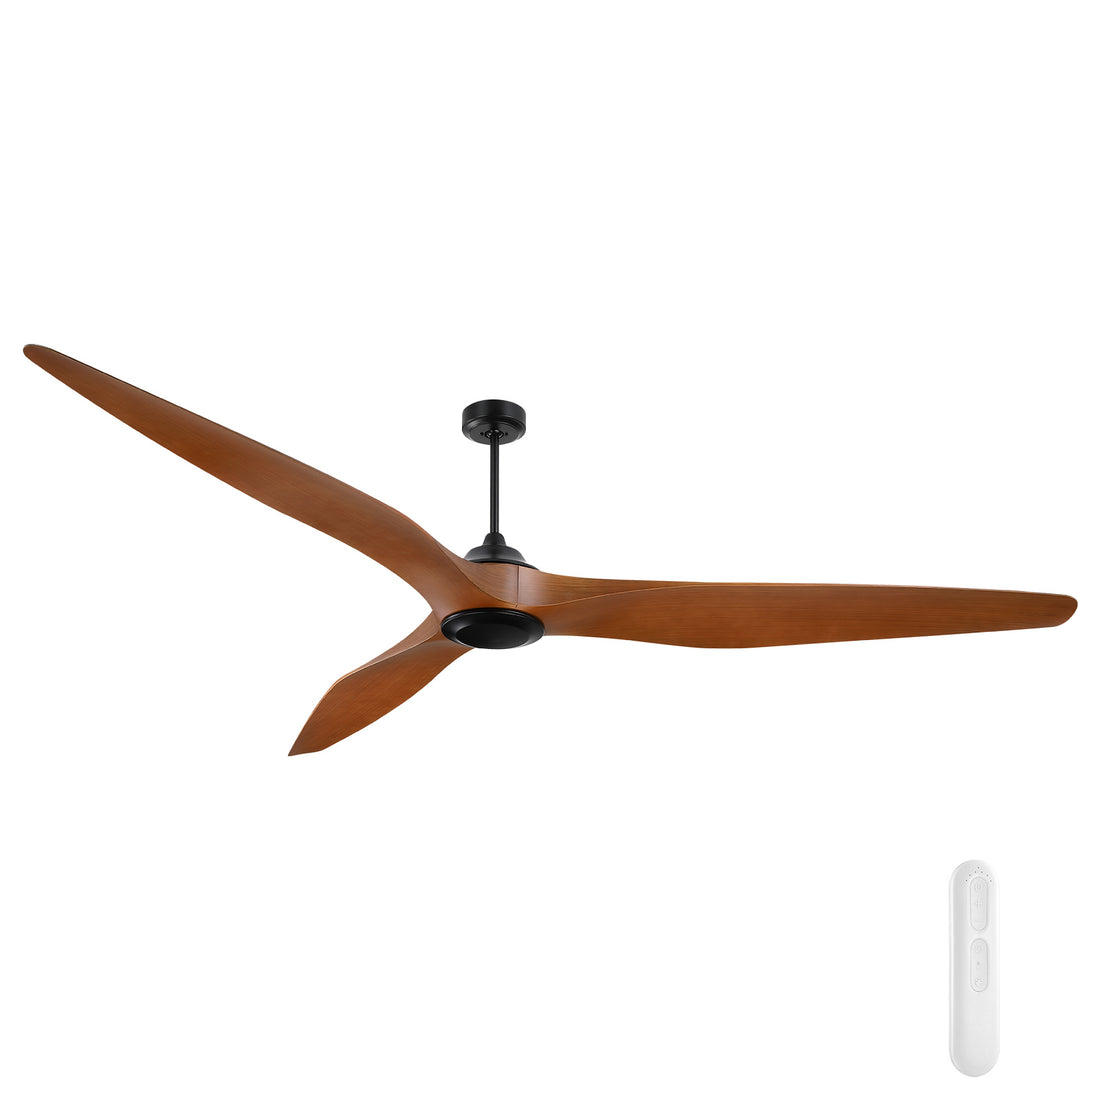 Century 254cm DC Ceiling Fan Kit with Remote